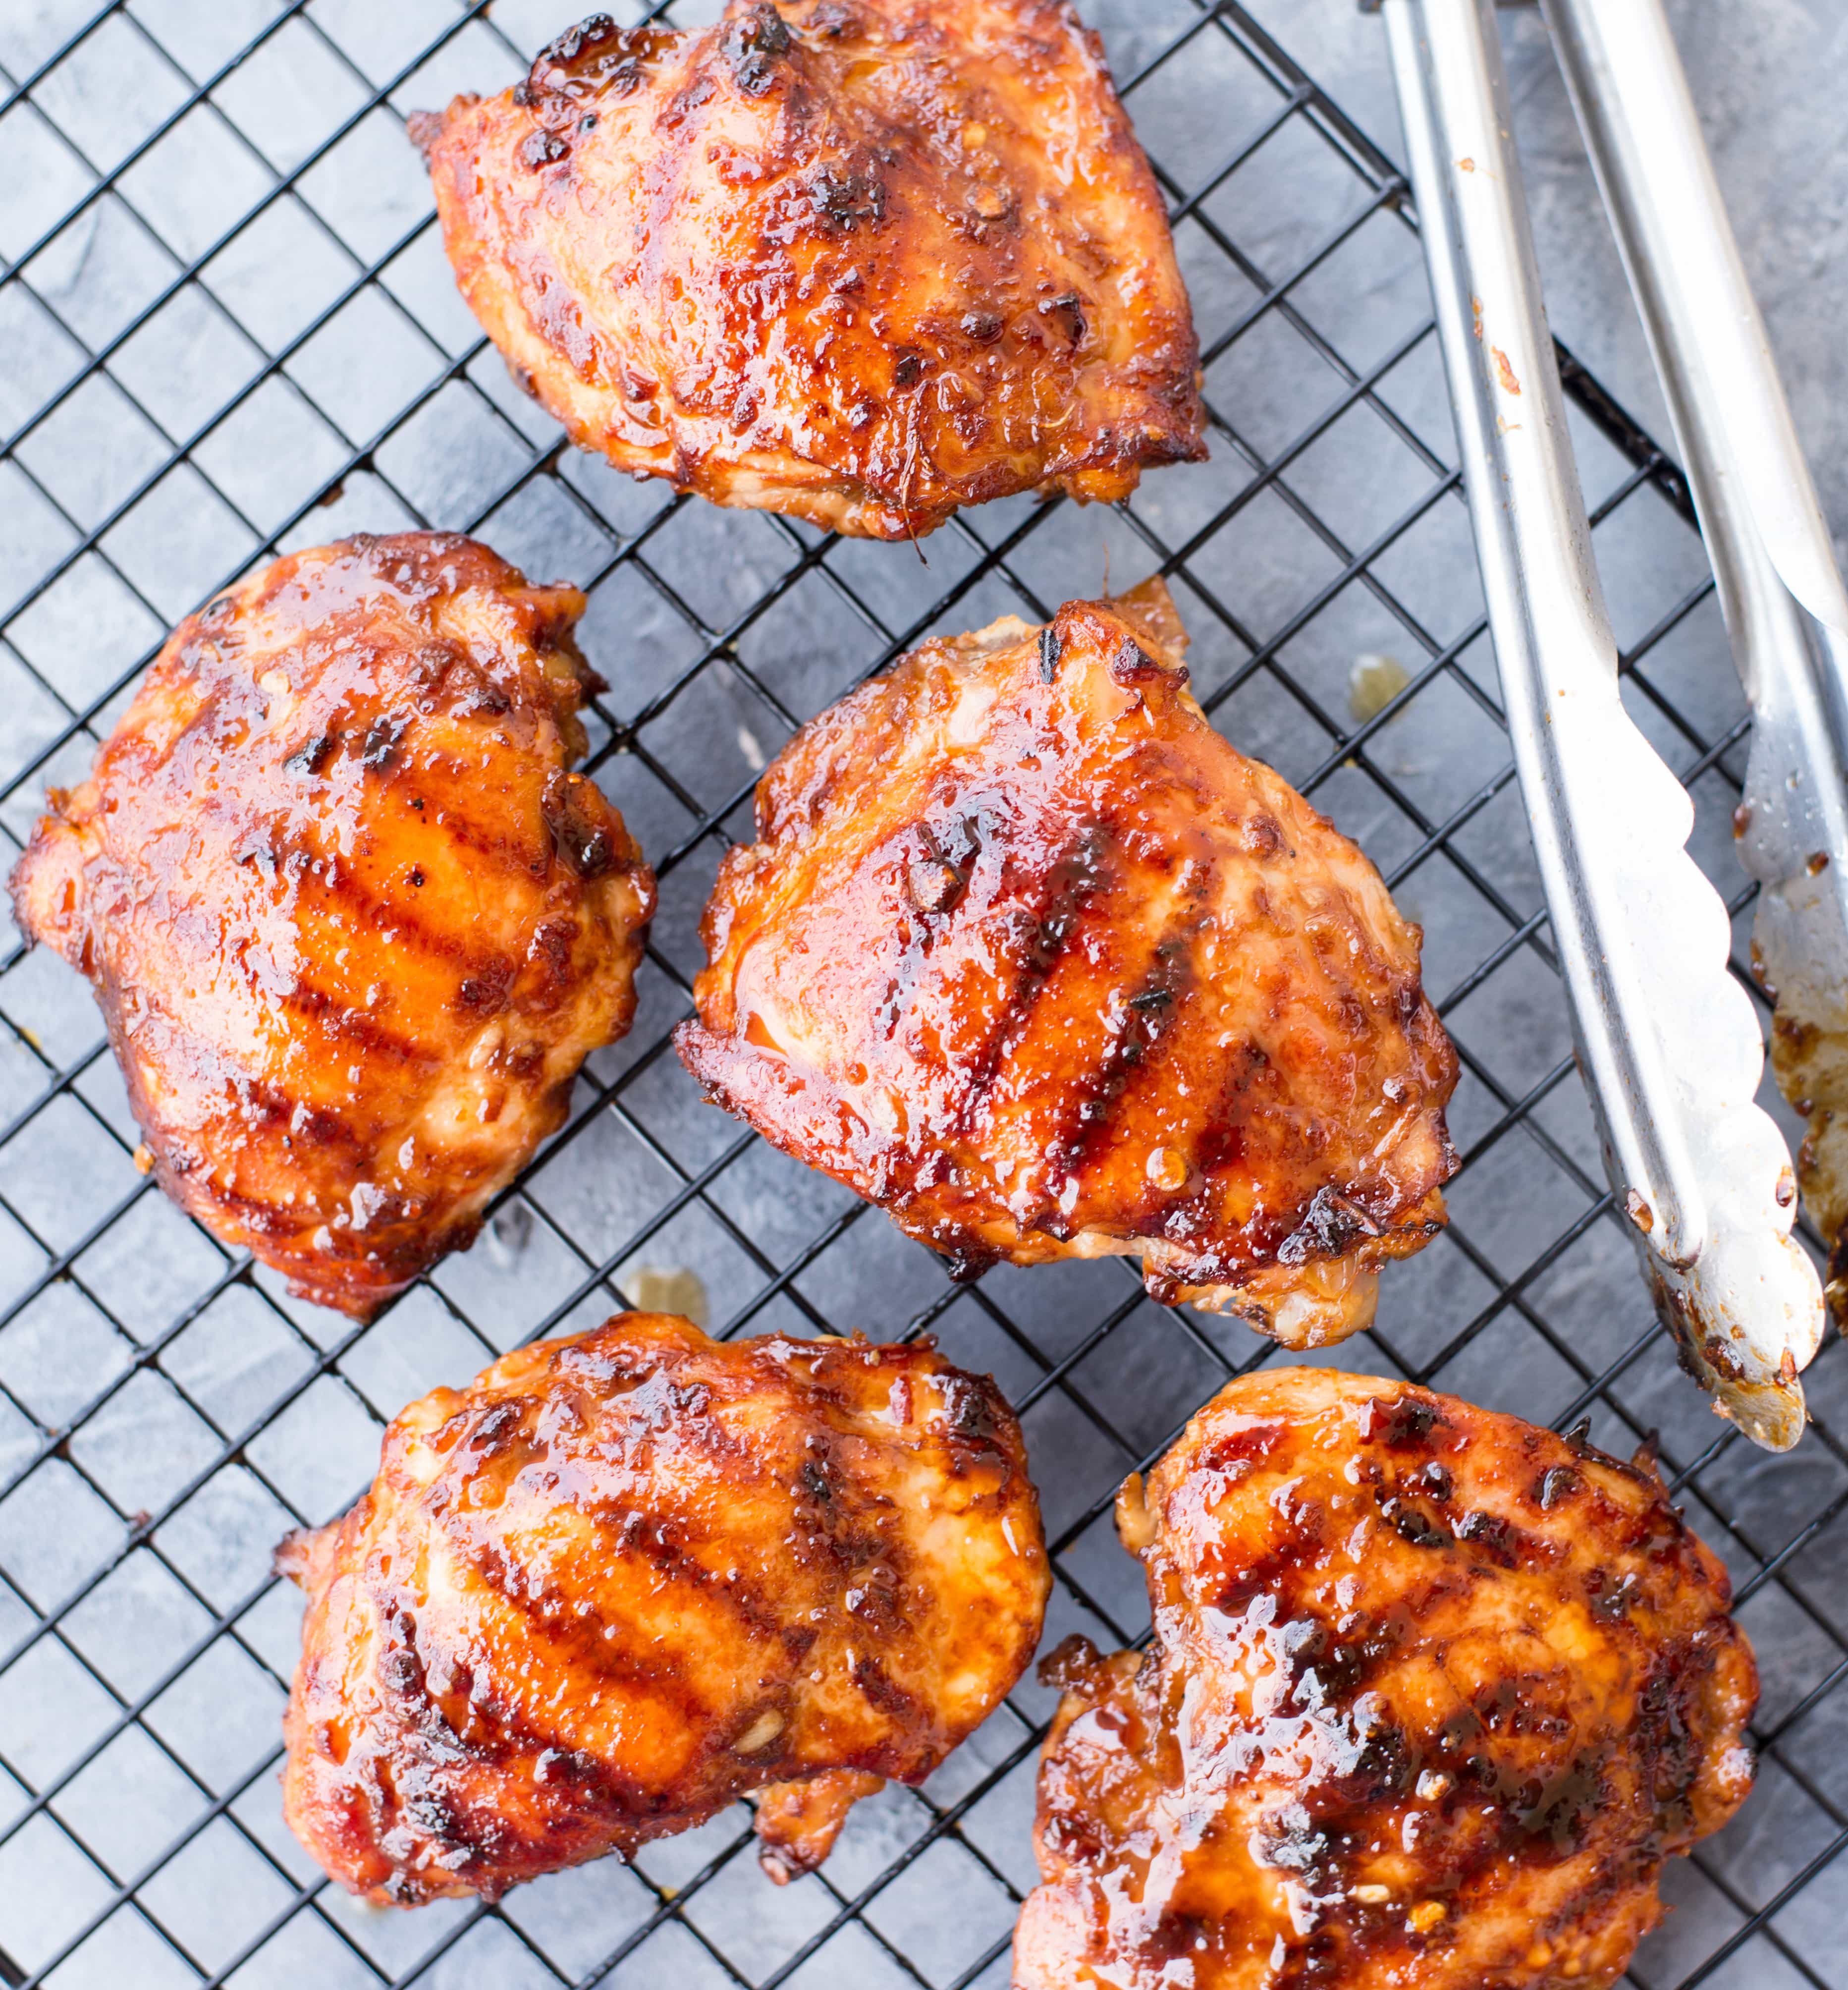 This Sweet and Spicy Thai Grilled Chicken has real Thai flavours. Chicken thighs marinated in Thai Sweet Chili Sauce, Lemongrass, fish sauce and grilled to perfection. 